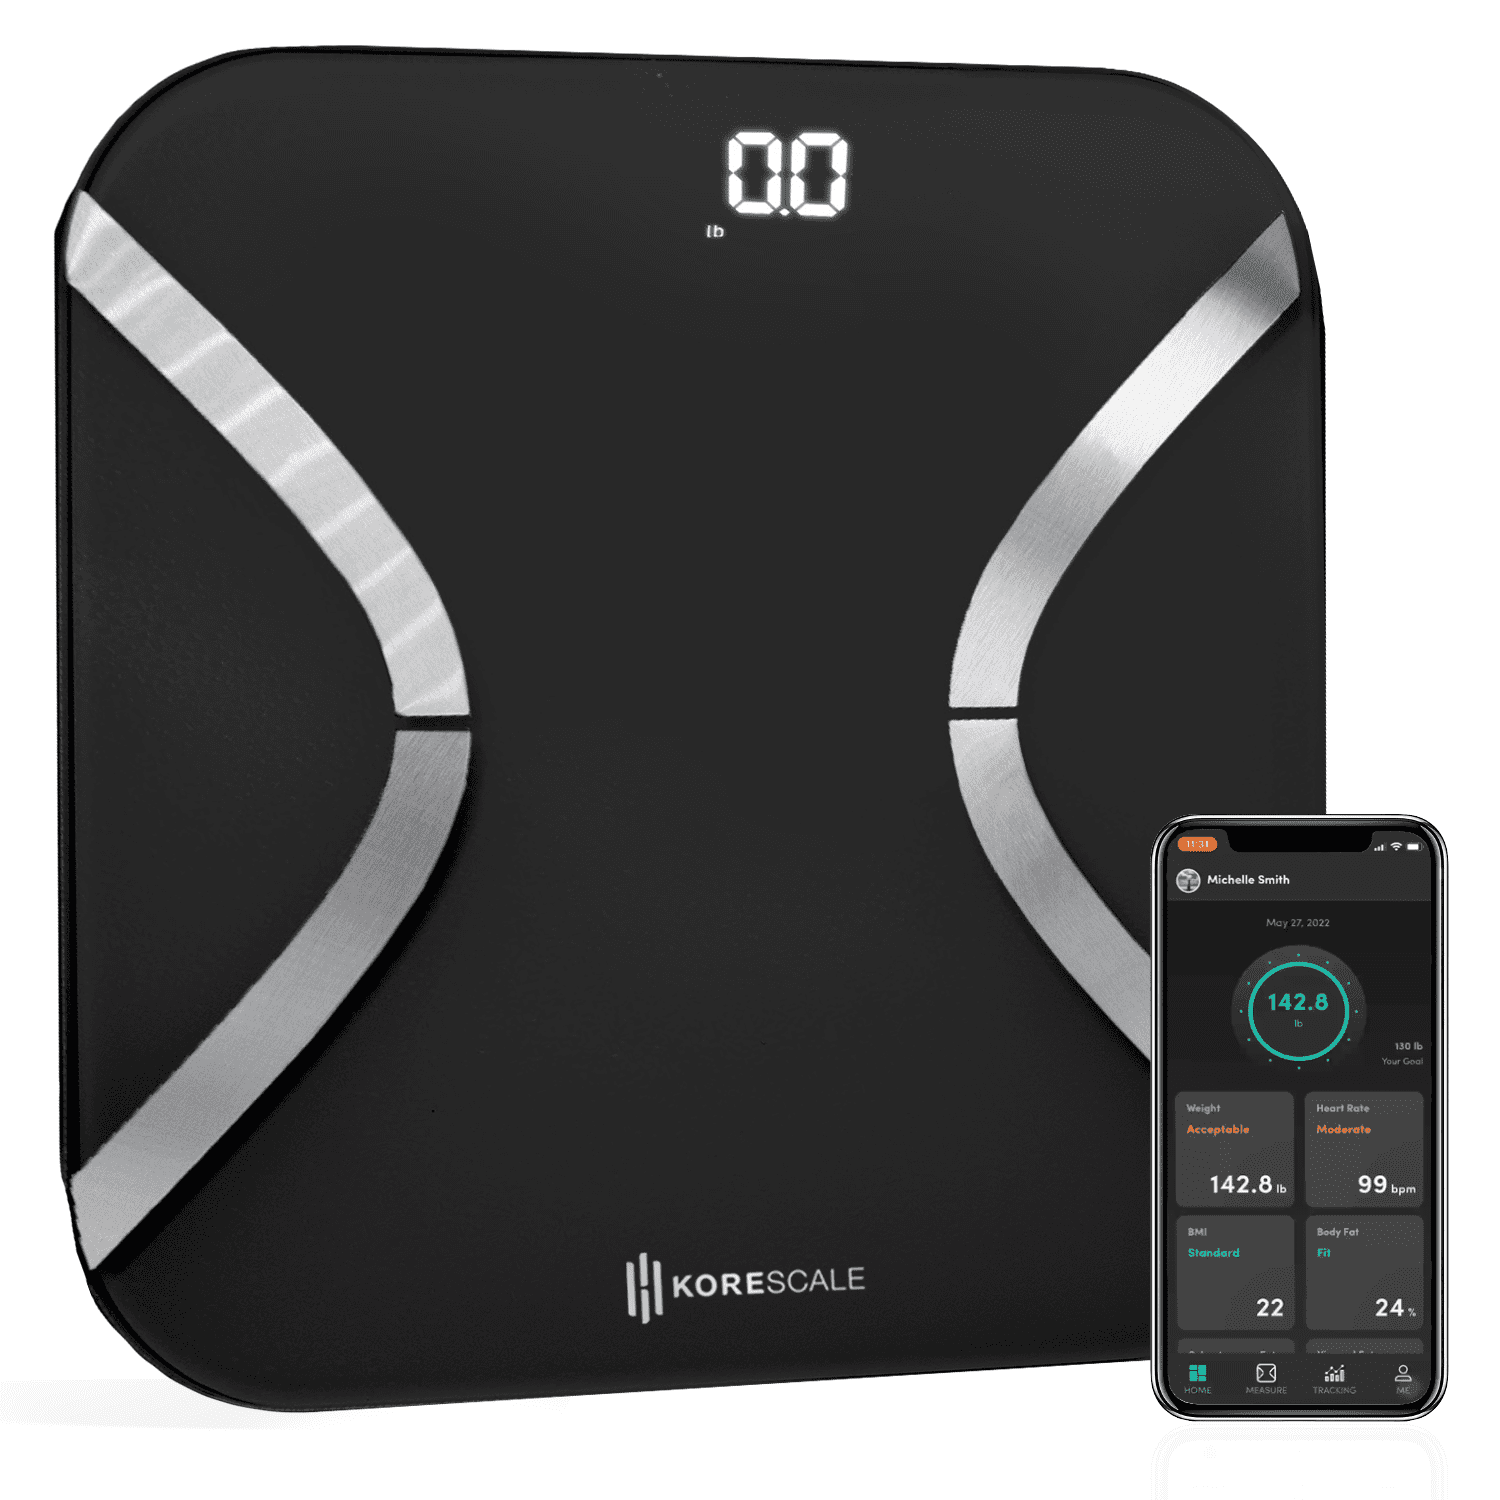 Omron BCM-500 Bluetooth Body Composition Monitor and Scale - Black  73796233501